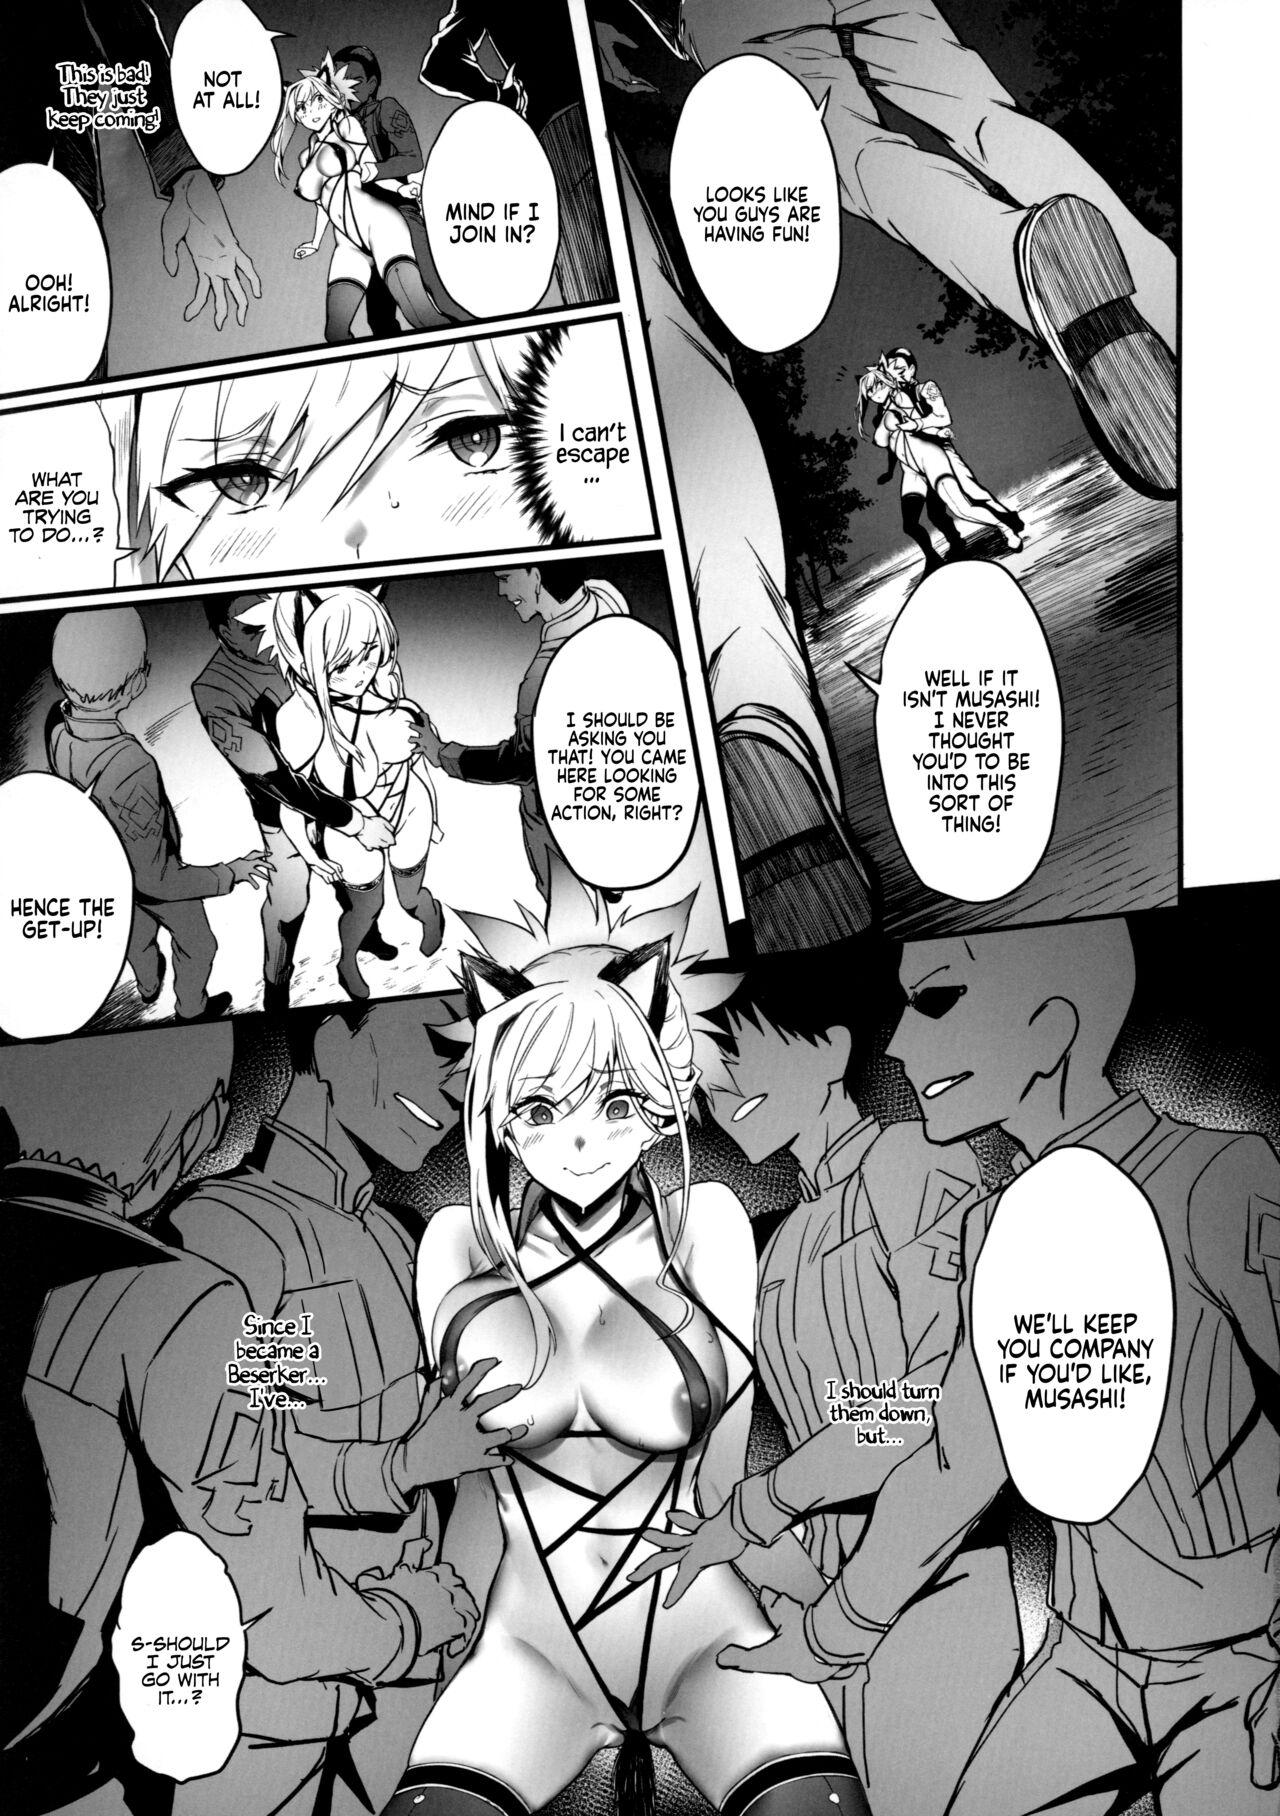 Tranny Sex Master no Benki wa kono Musashi | Master’s Cumdump is the One and Only Musashi - Fate grand order Family Sex - Page 5